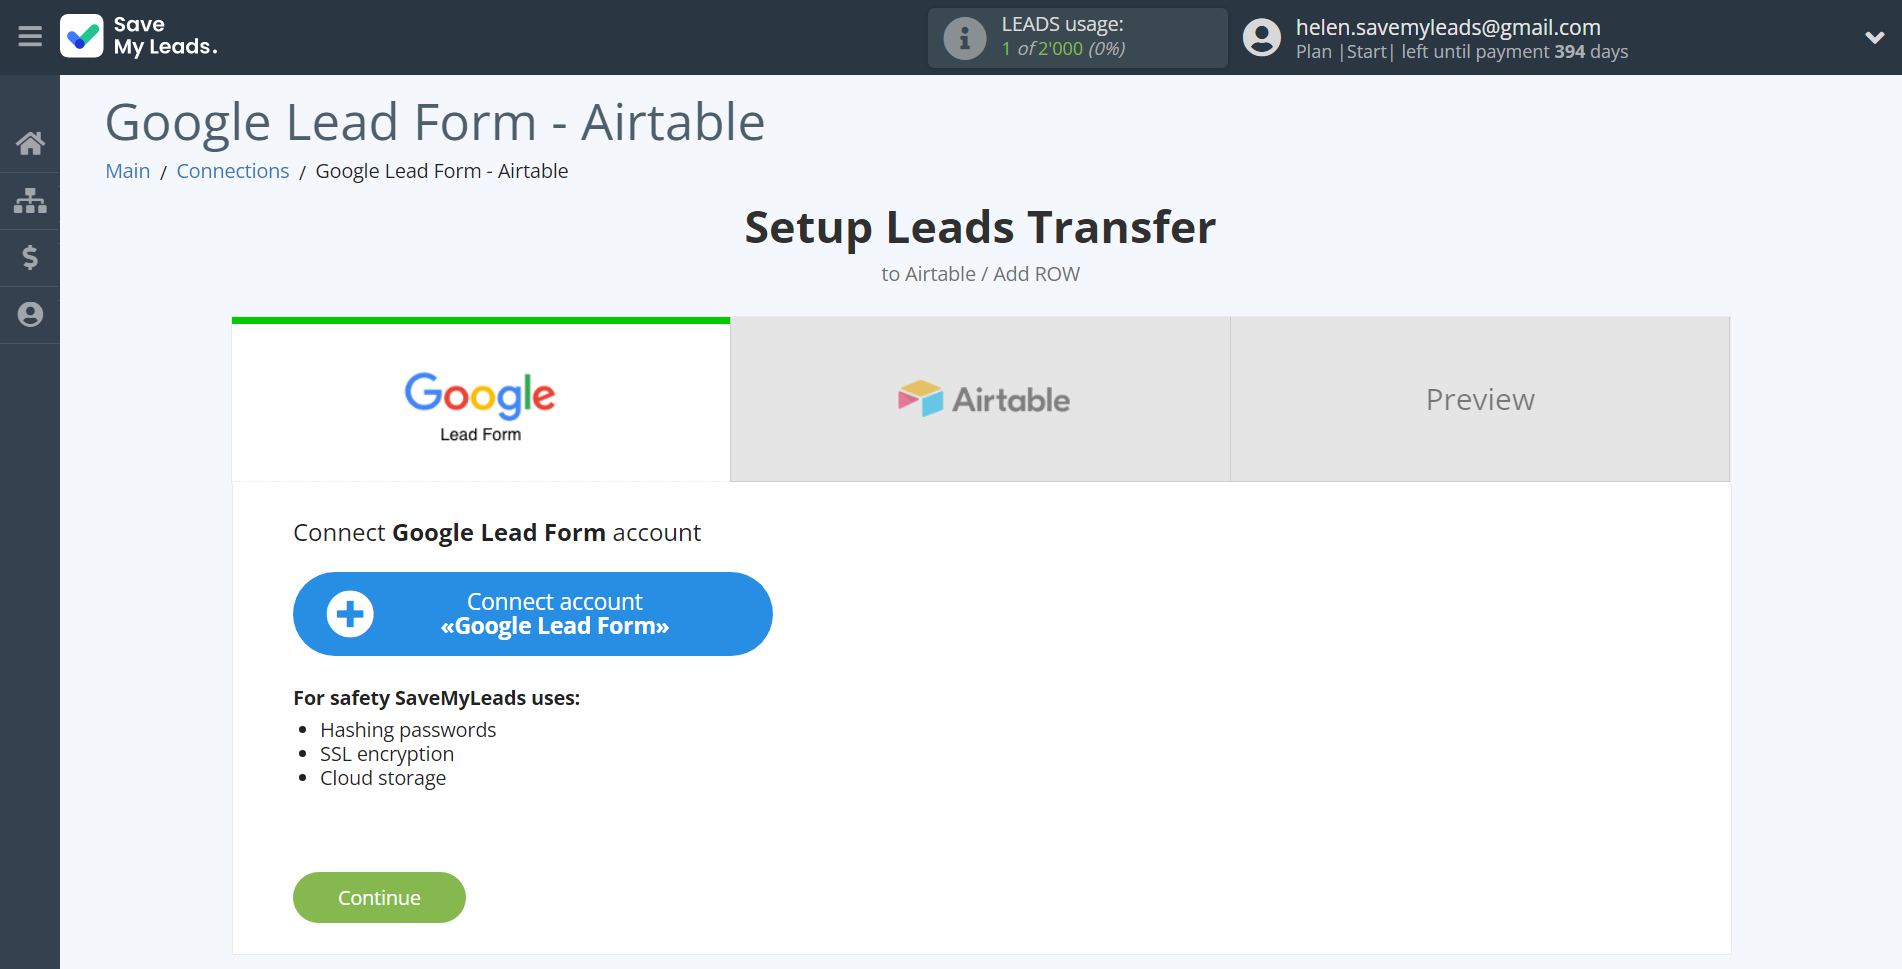 How to Connect Google Lead Form with AirTable | Data Source account